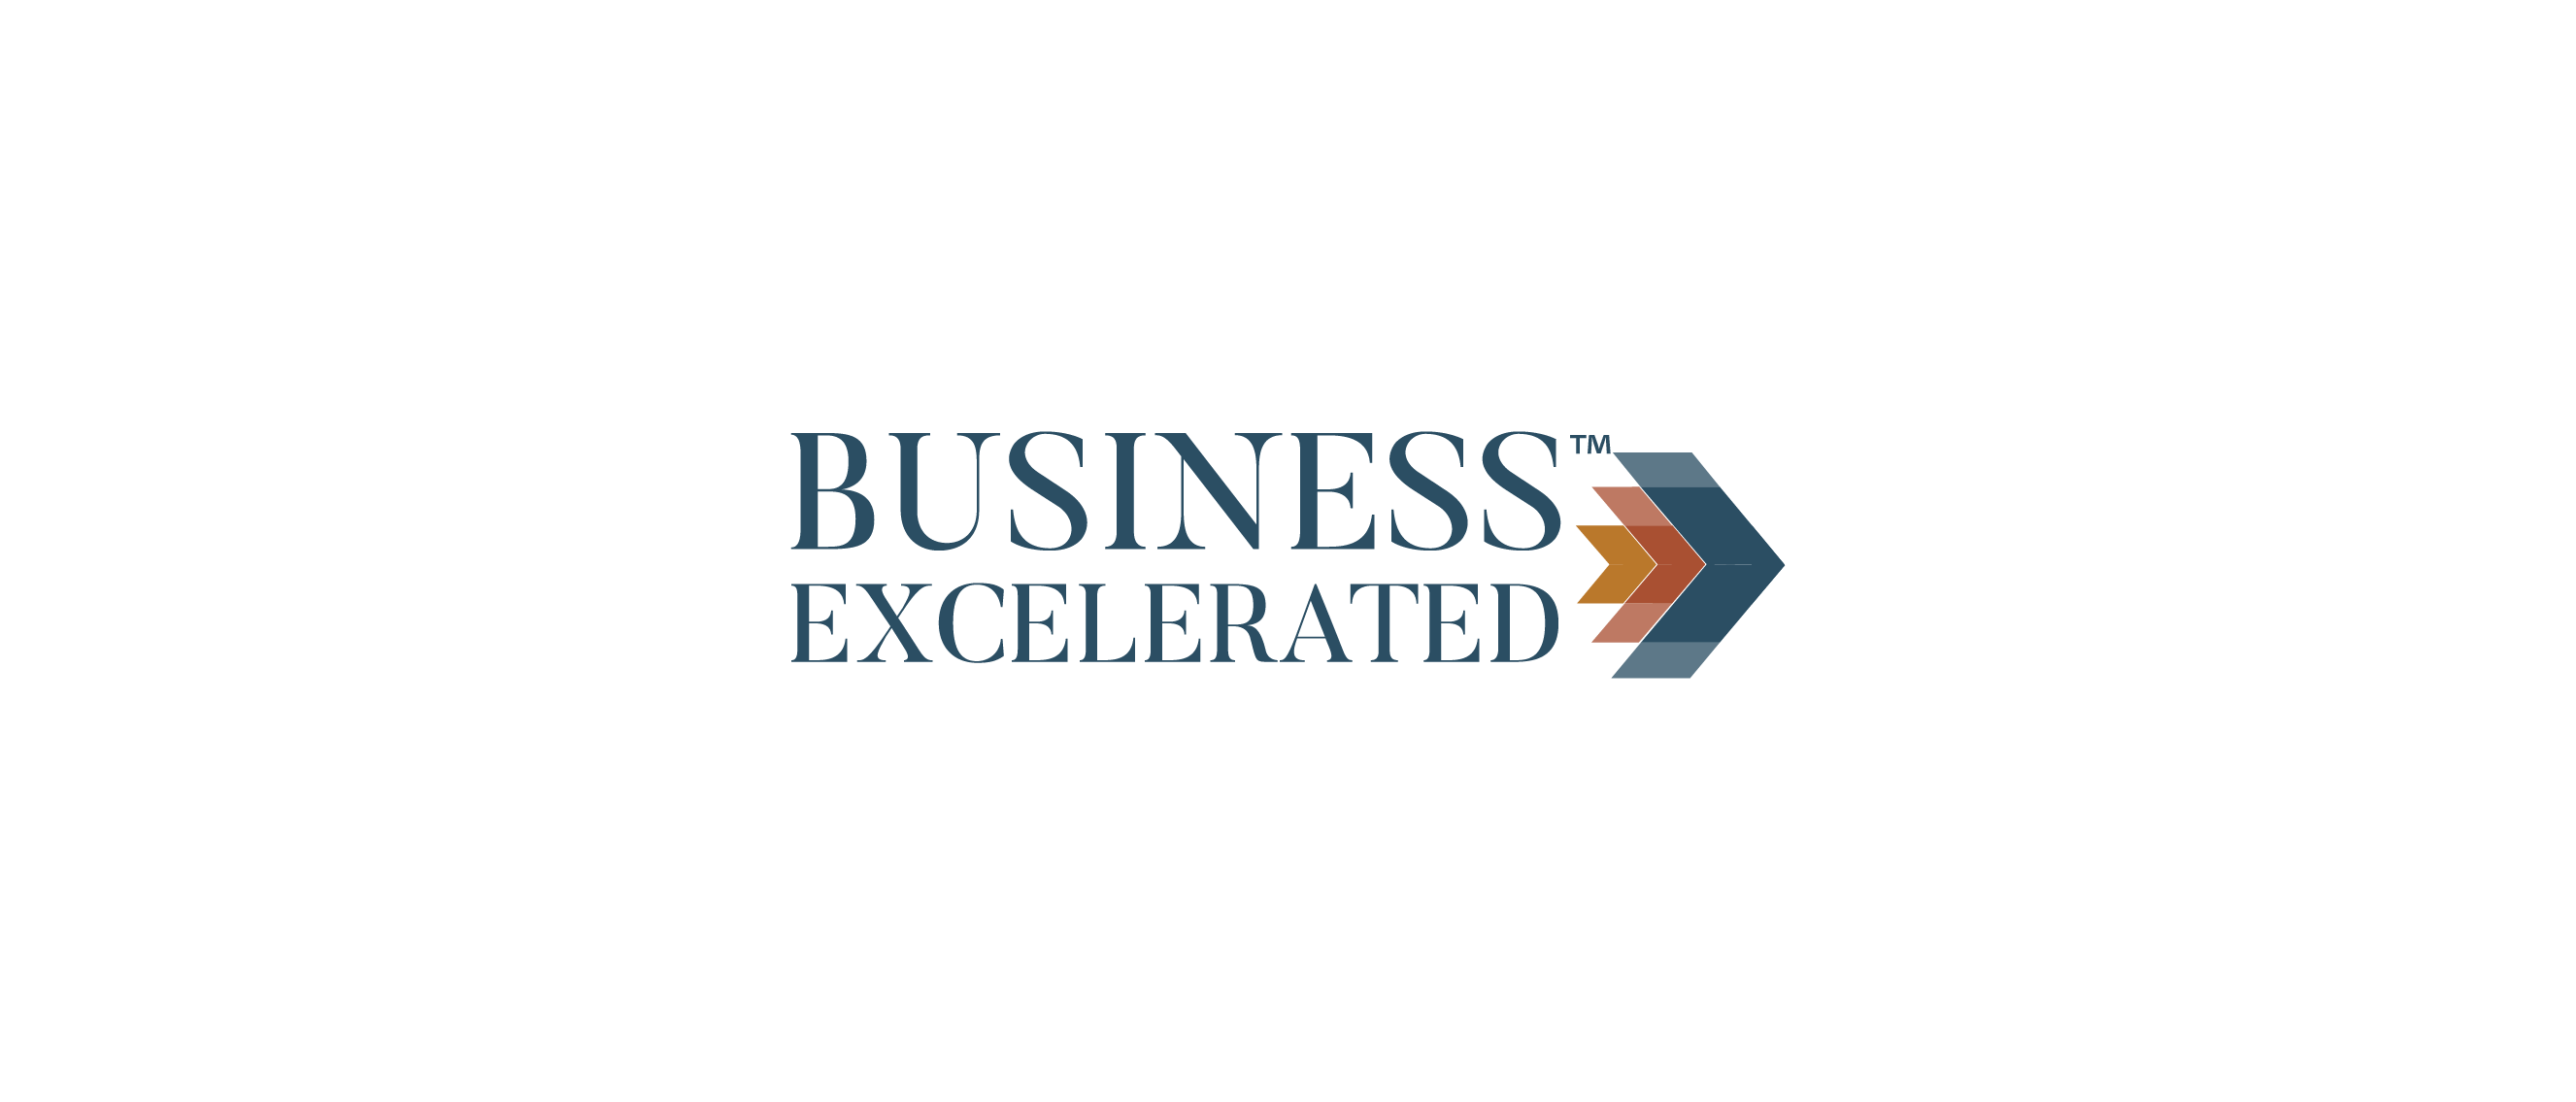 Increase the Speed of Execution - Business Excelerated